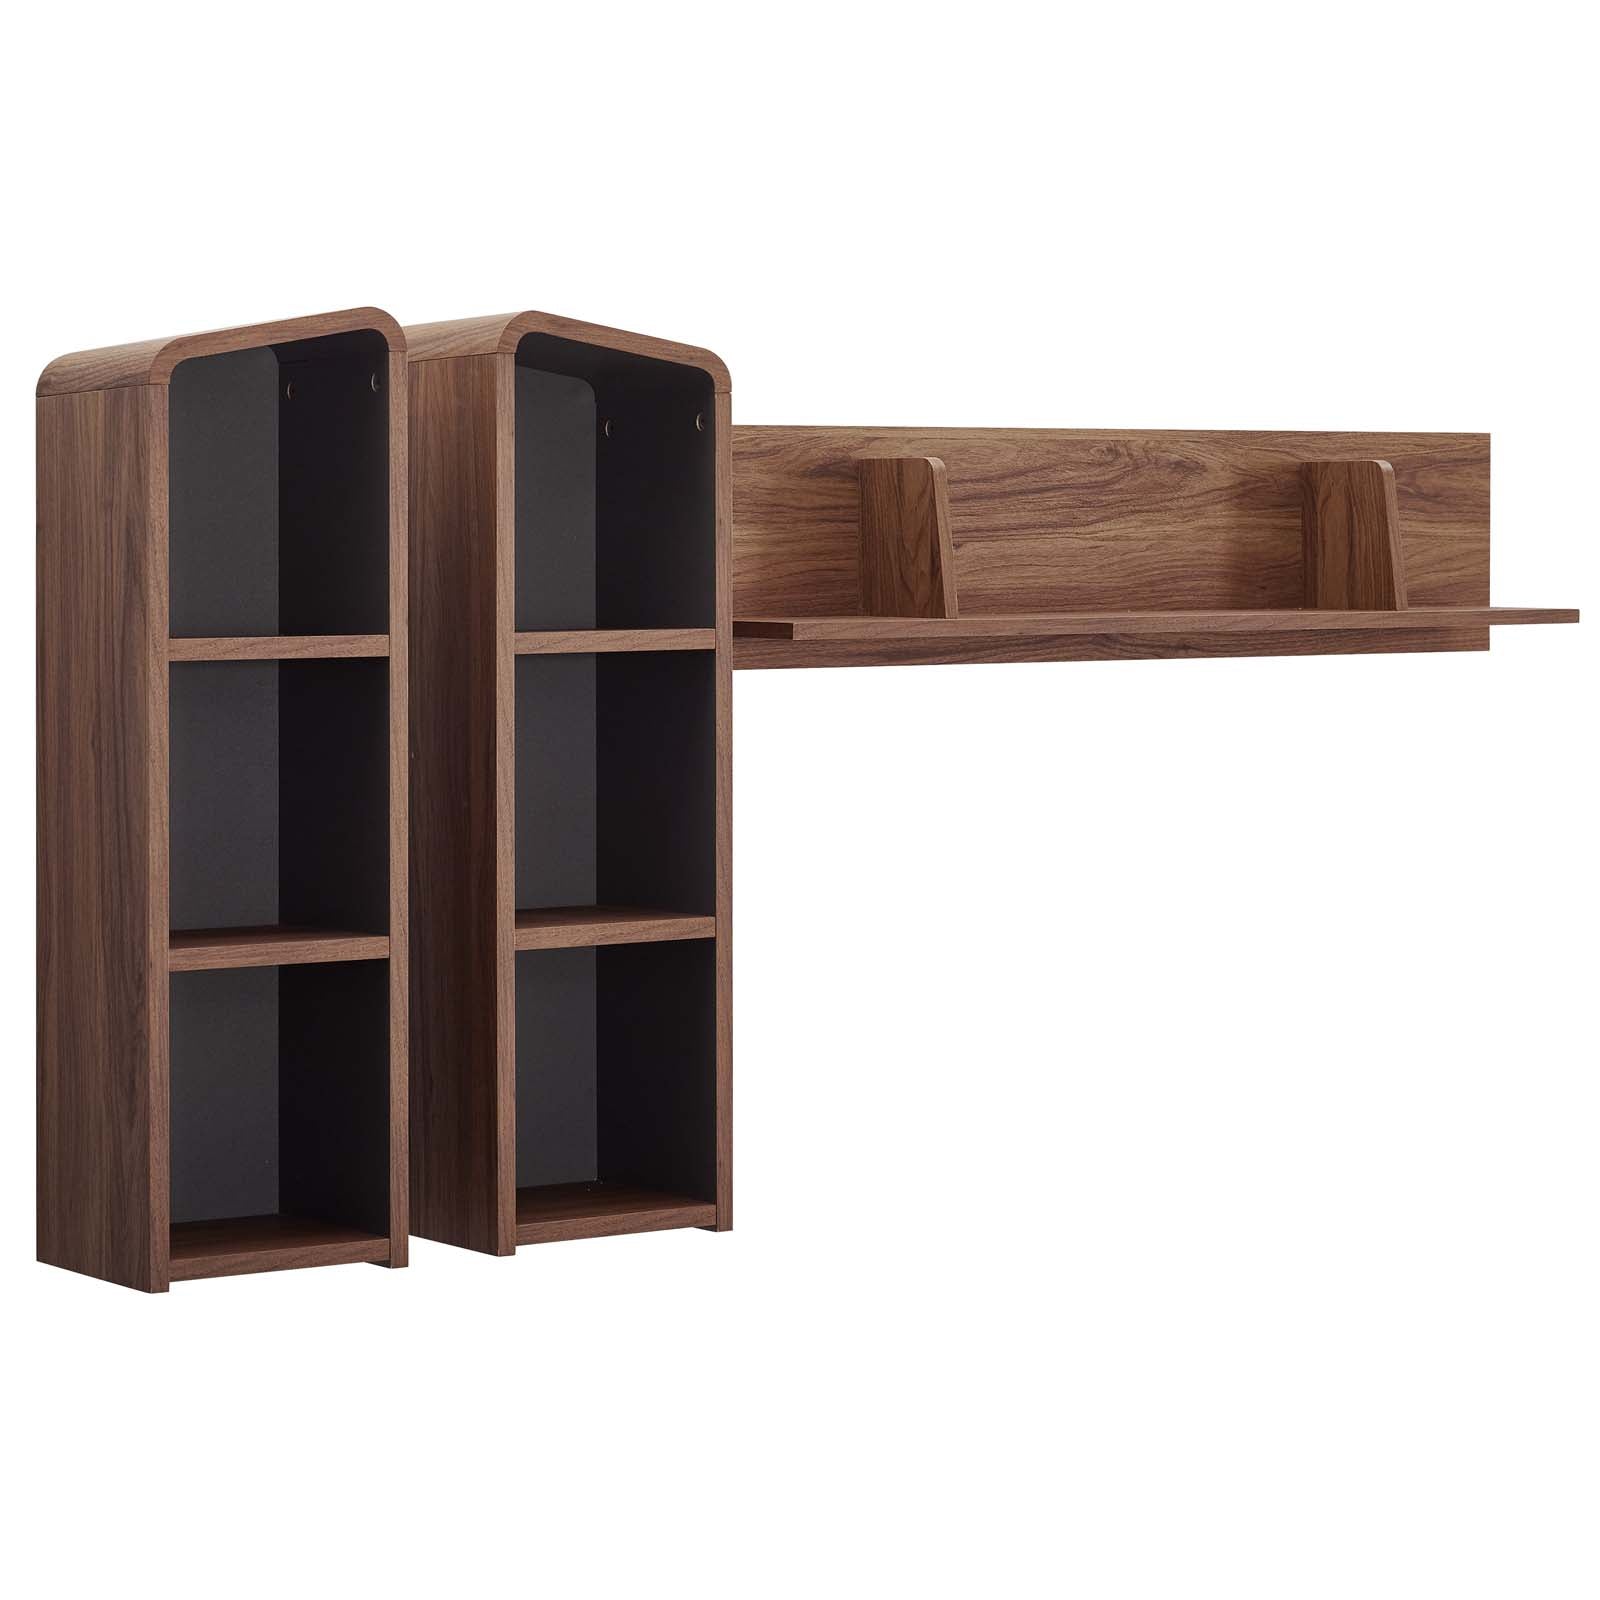 Omnistand Wall Mounted Shelves - East Shore Modern Home Furnishings